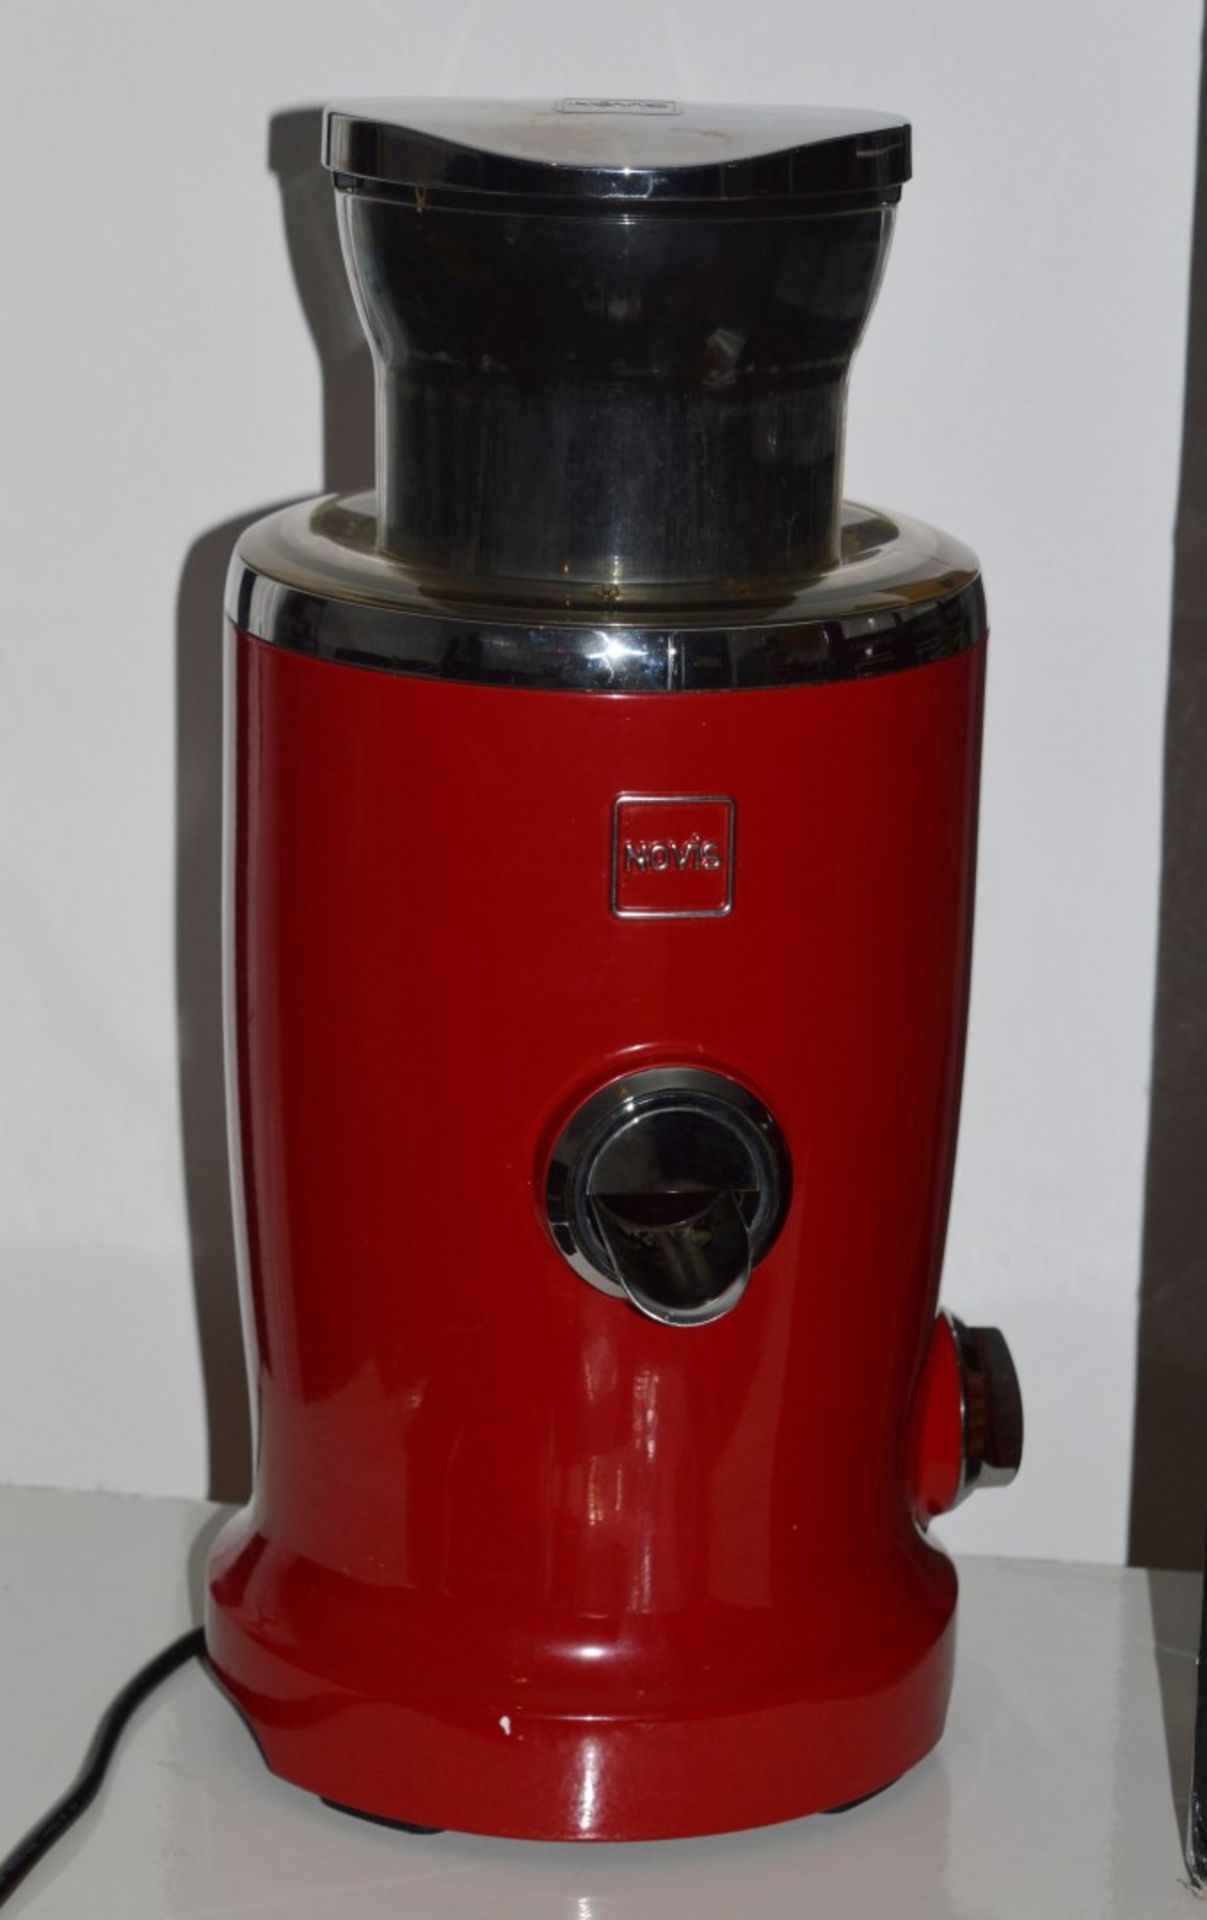 1 x Novis Vita Juice Blender in Red - Made in Switzerkabd For a Natural Healthy Life Style - With - Image 6 of 8